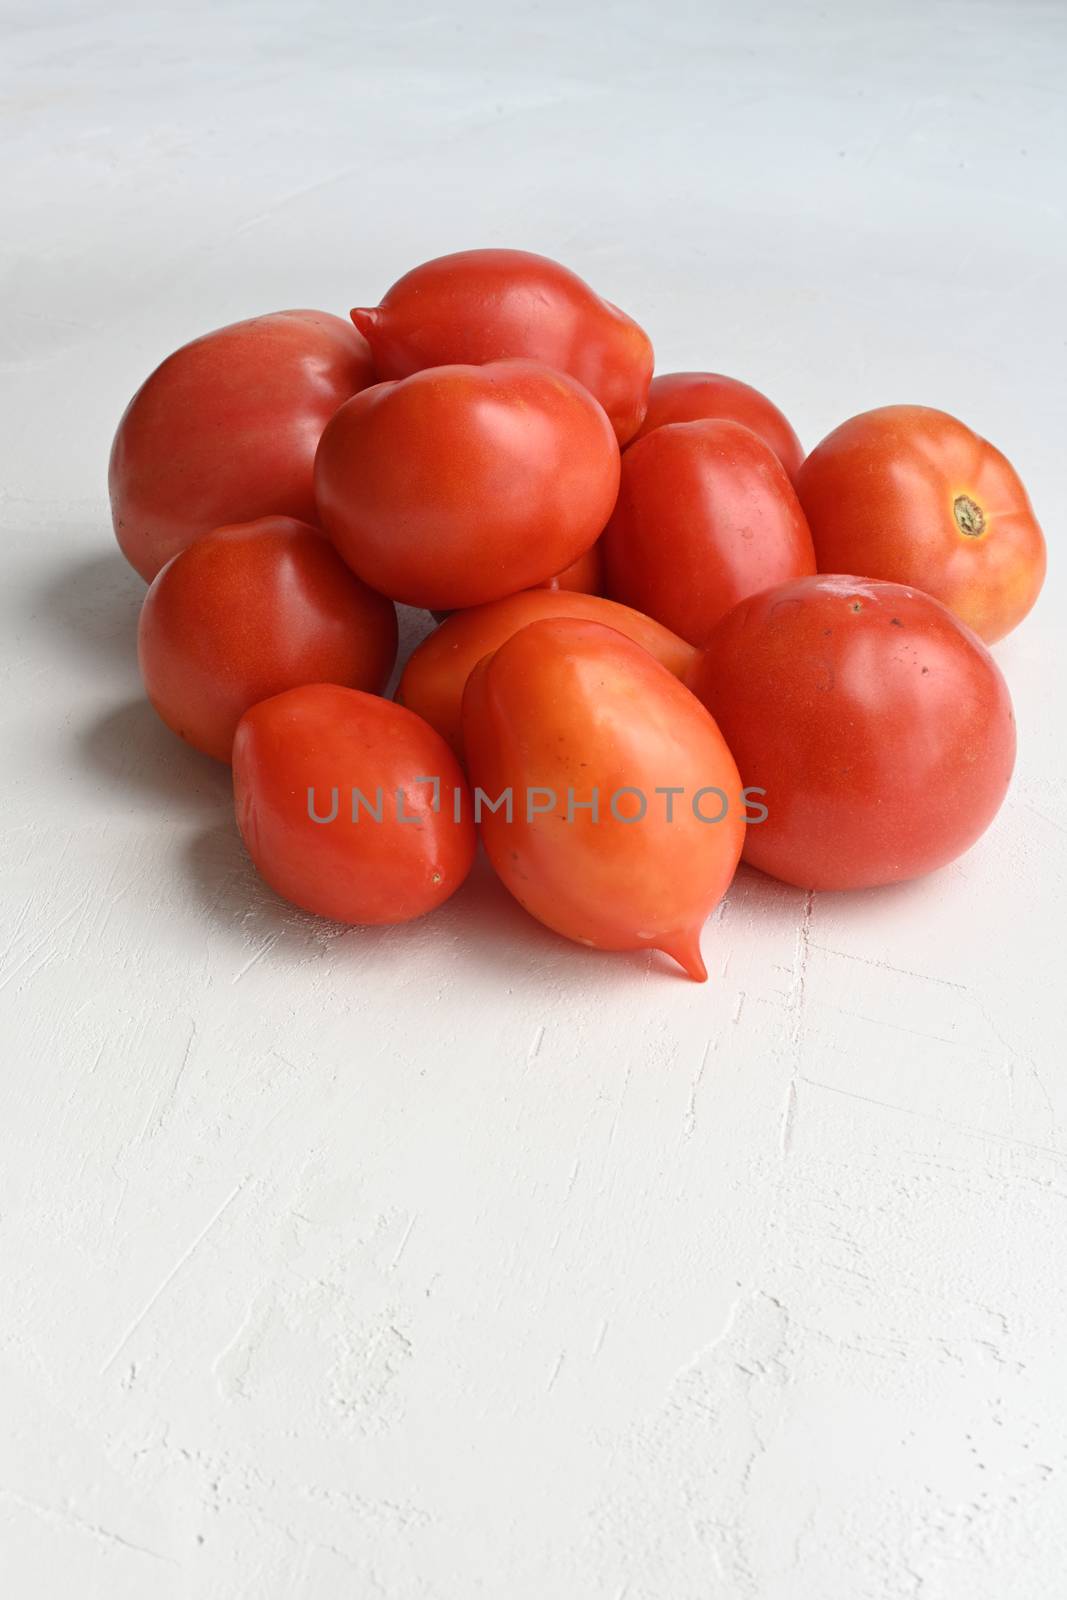 Blurred image of a red tomato on a white background by sashokddt